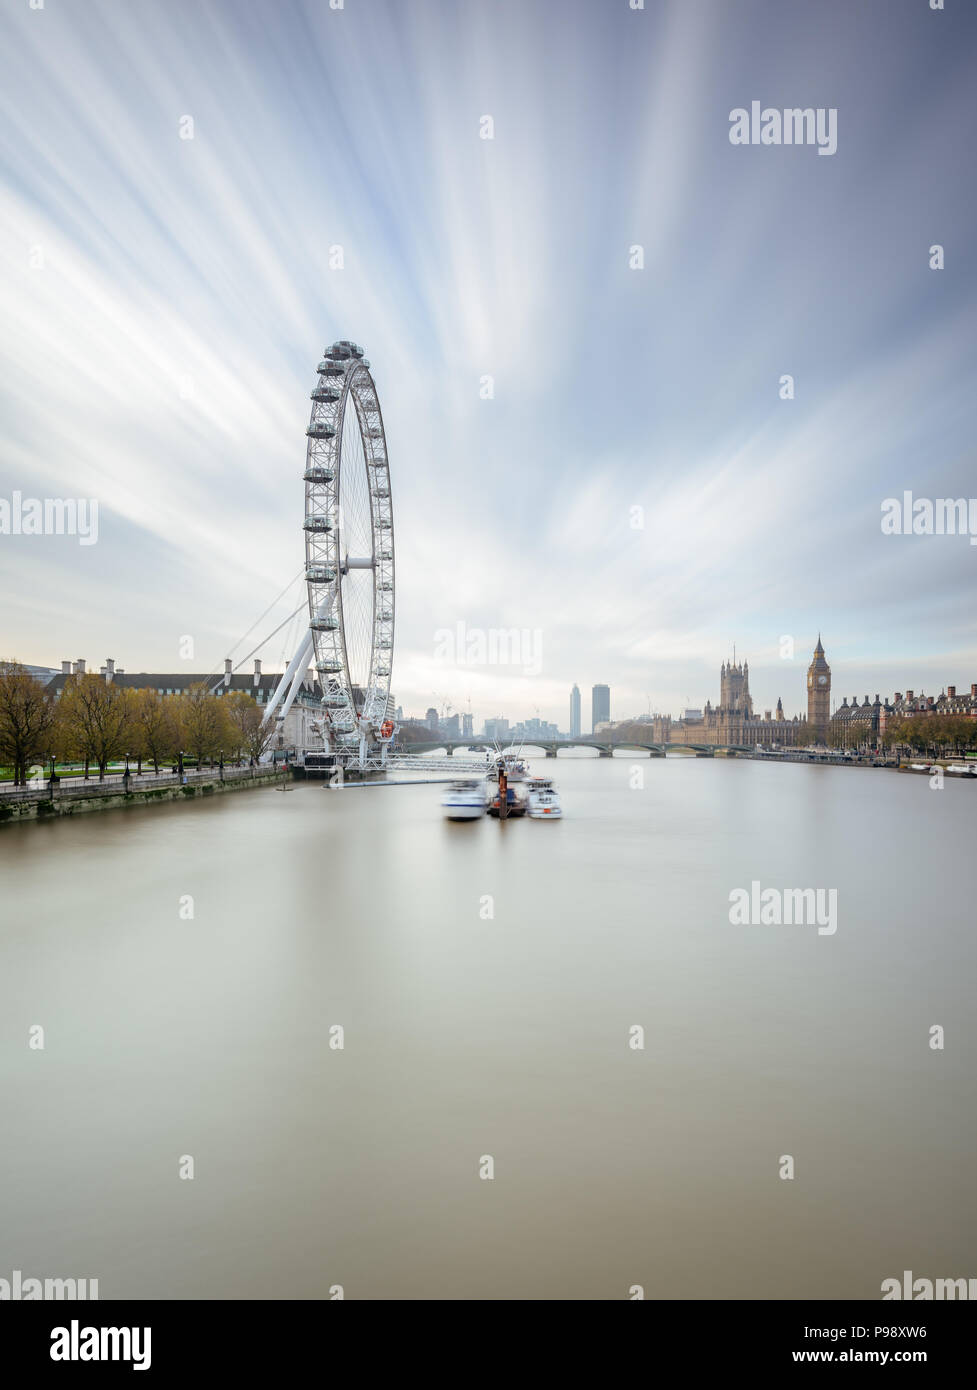 Long exposure portrait view from Hungerford Bridge, London, towards the Coca-Cola London Eye, Westminster Bridge, Big Ben and Houses of Parliament Stock Photo